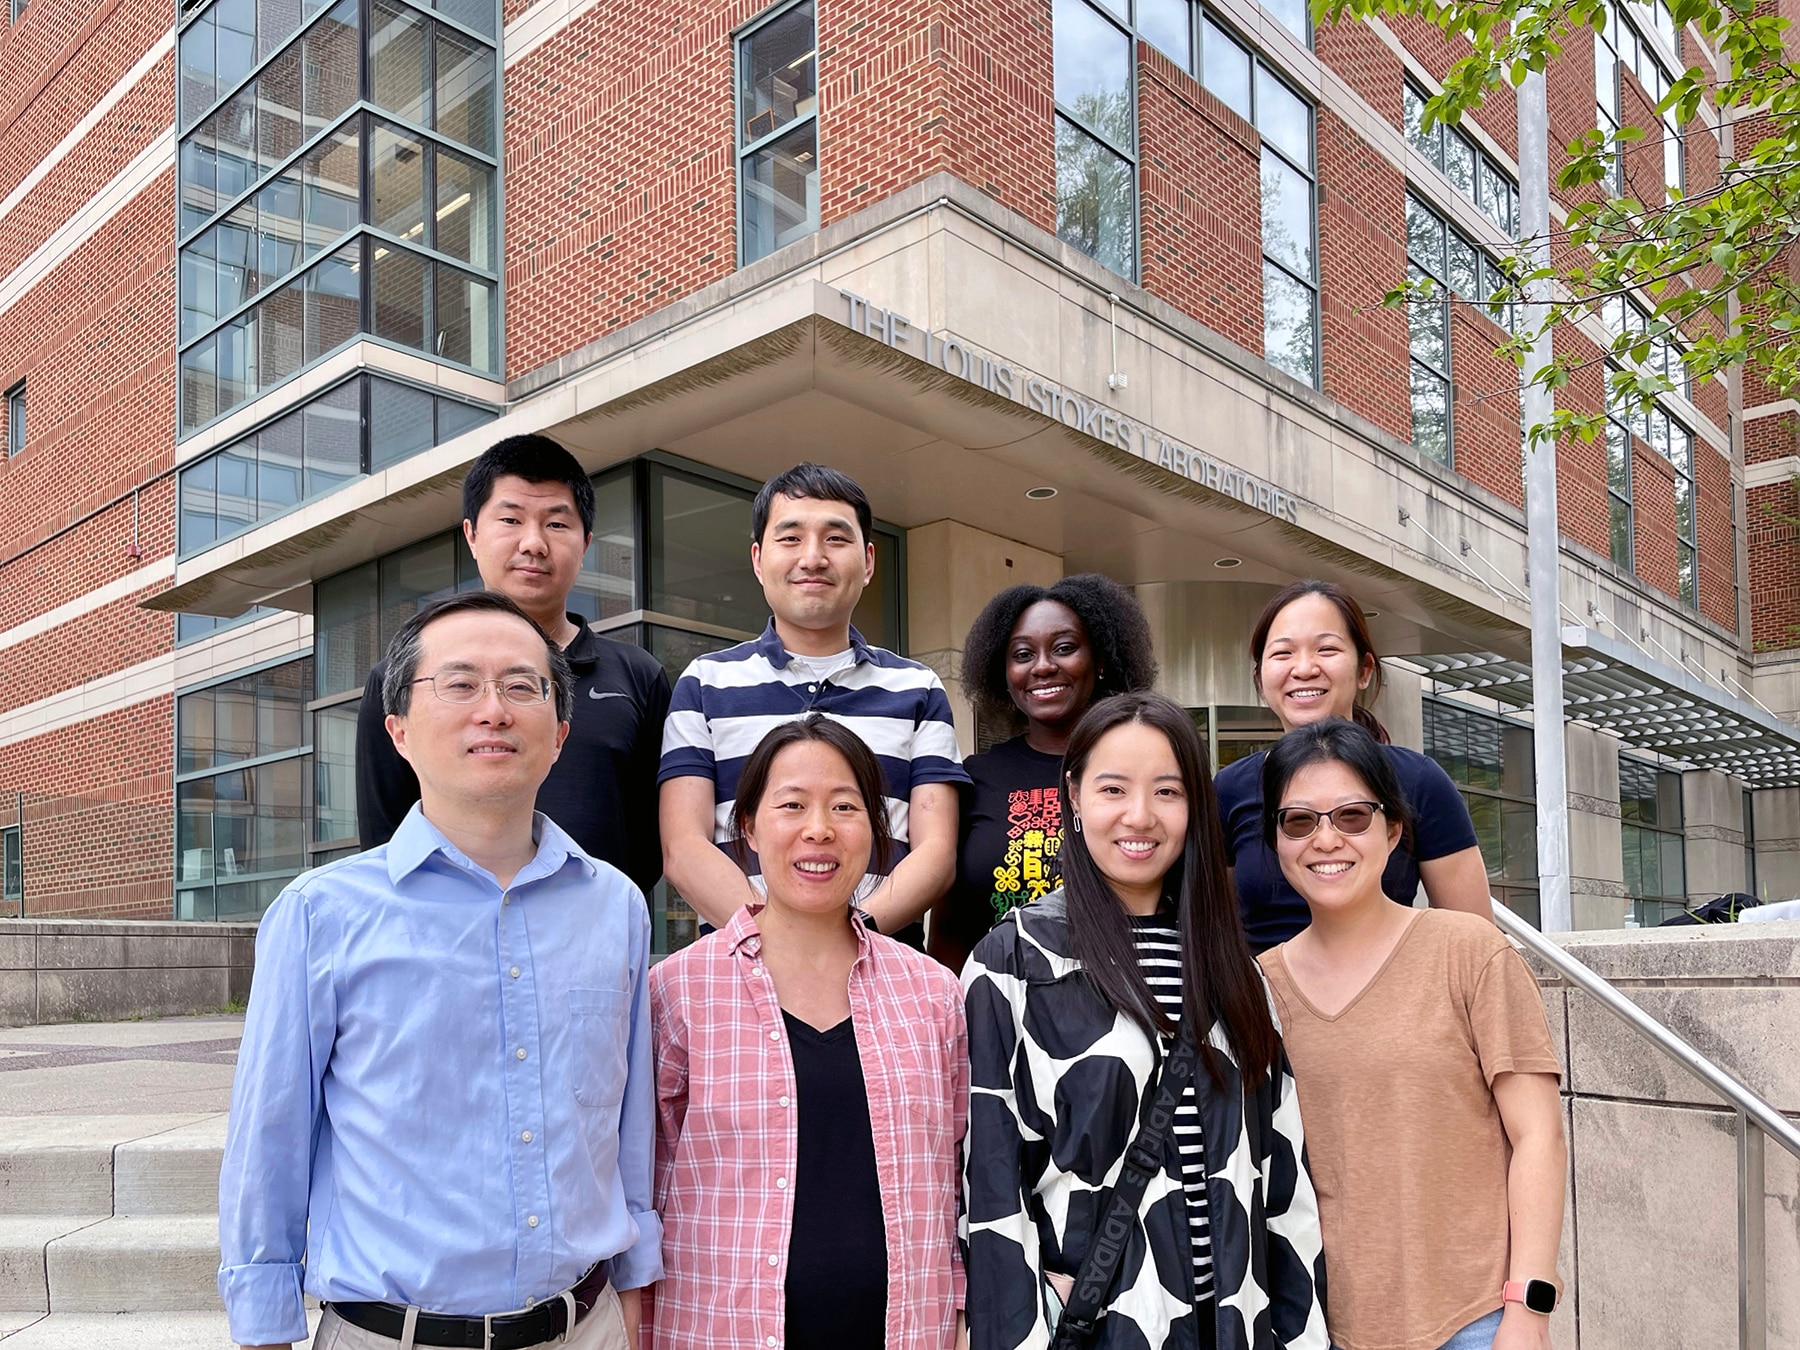 Adipocyte Biology and Gene Regulation Section standing outside and smiling.